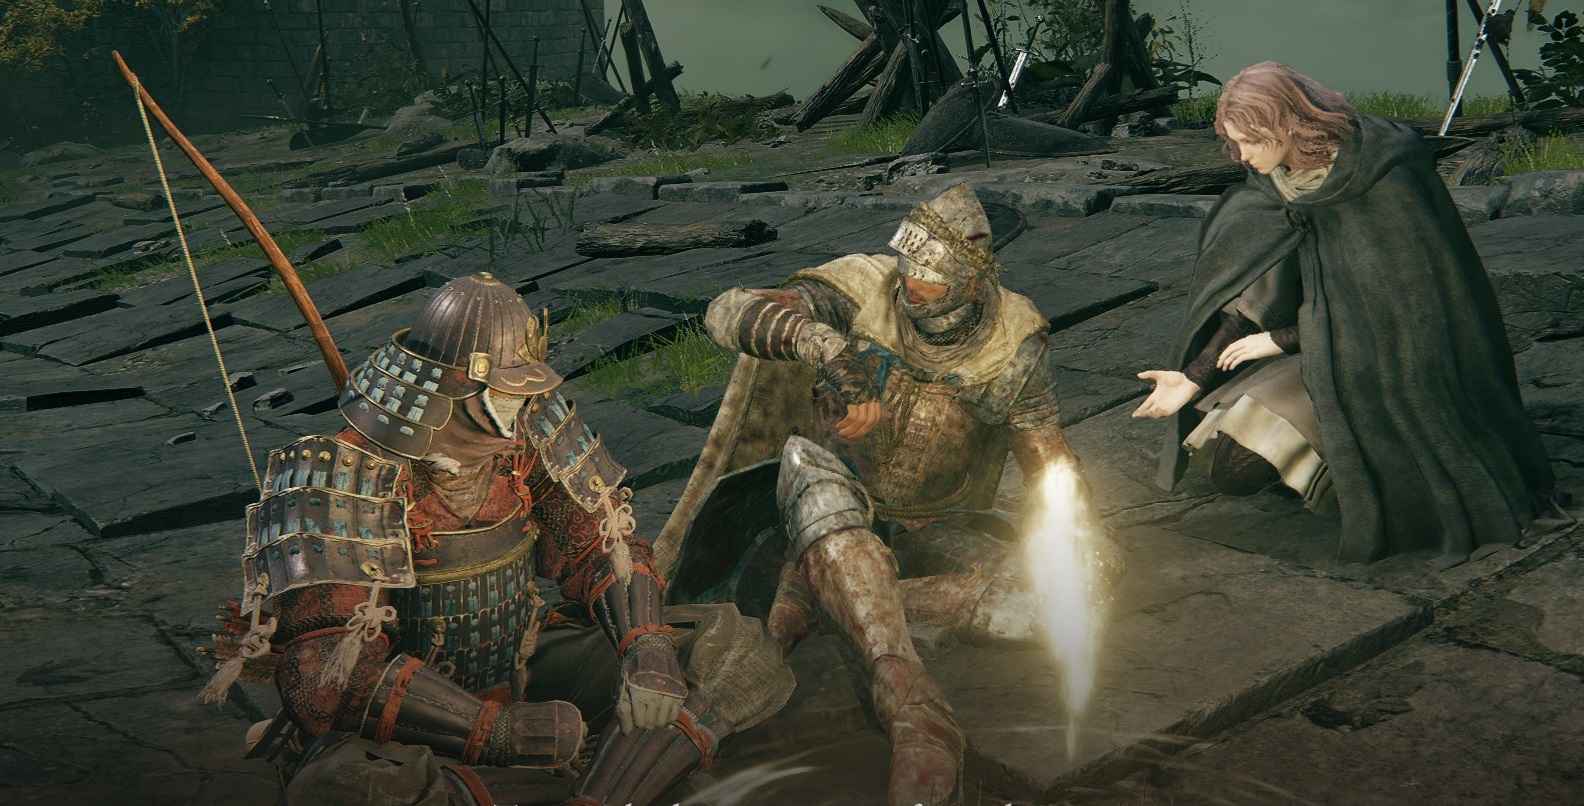  FromSoftware says Elden Ring's popular Seamless Co-op mod is 'definitely not something we actively oppose,' and may even 'consider ideas like that with our future games' 